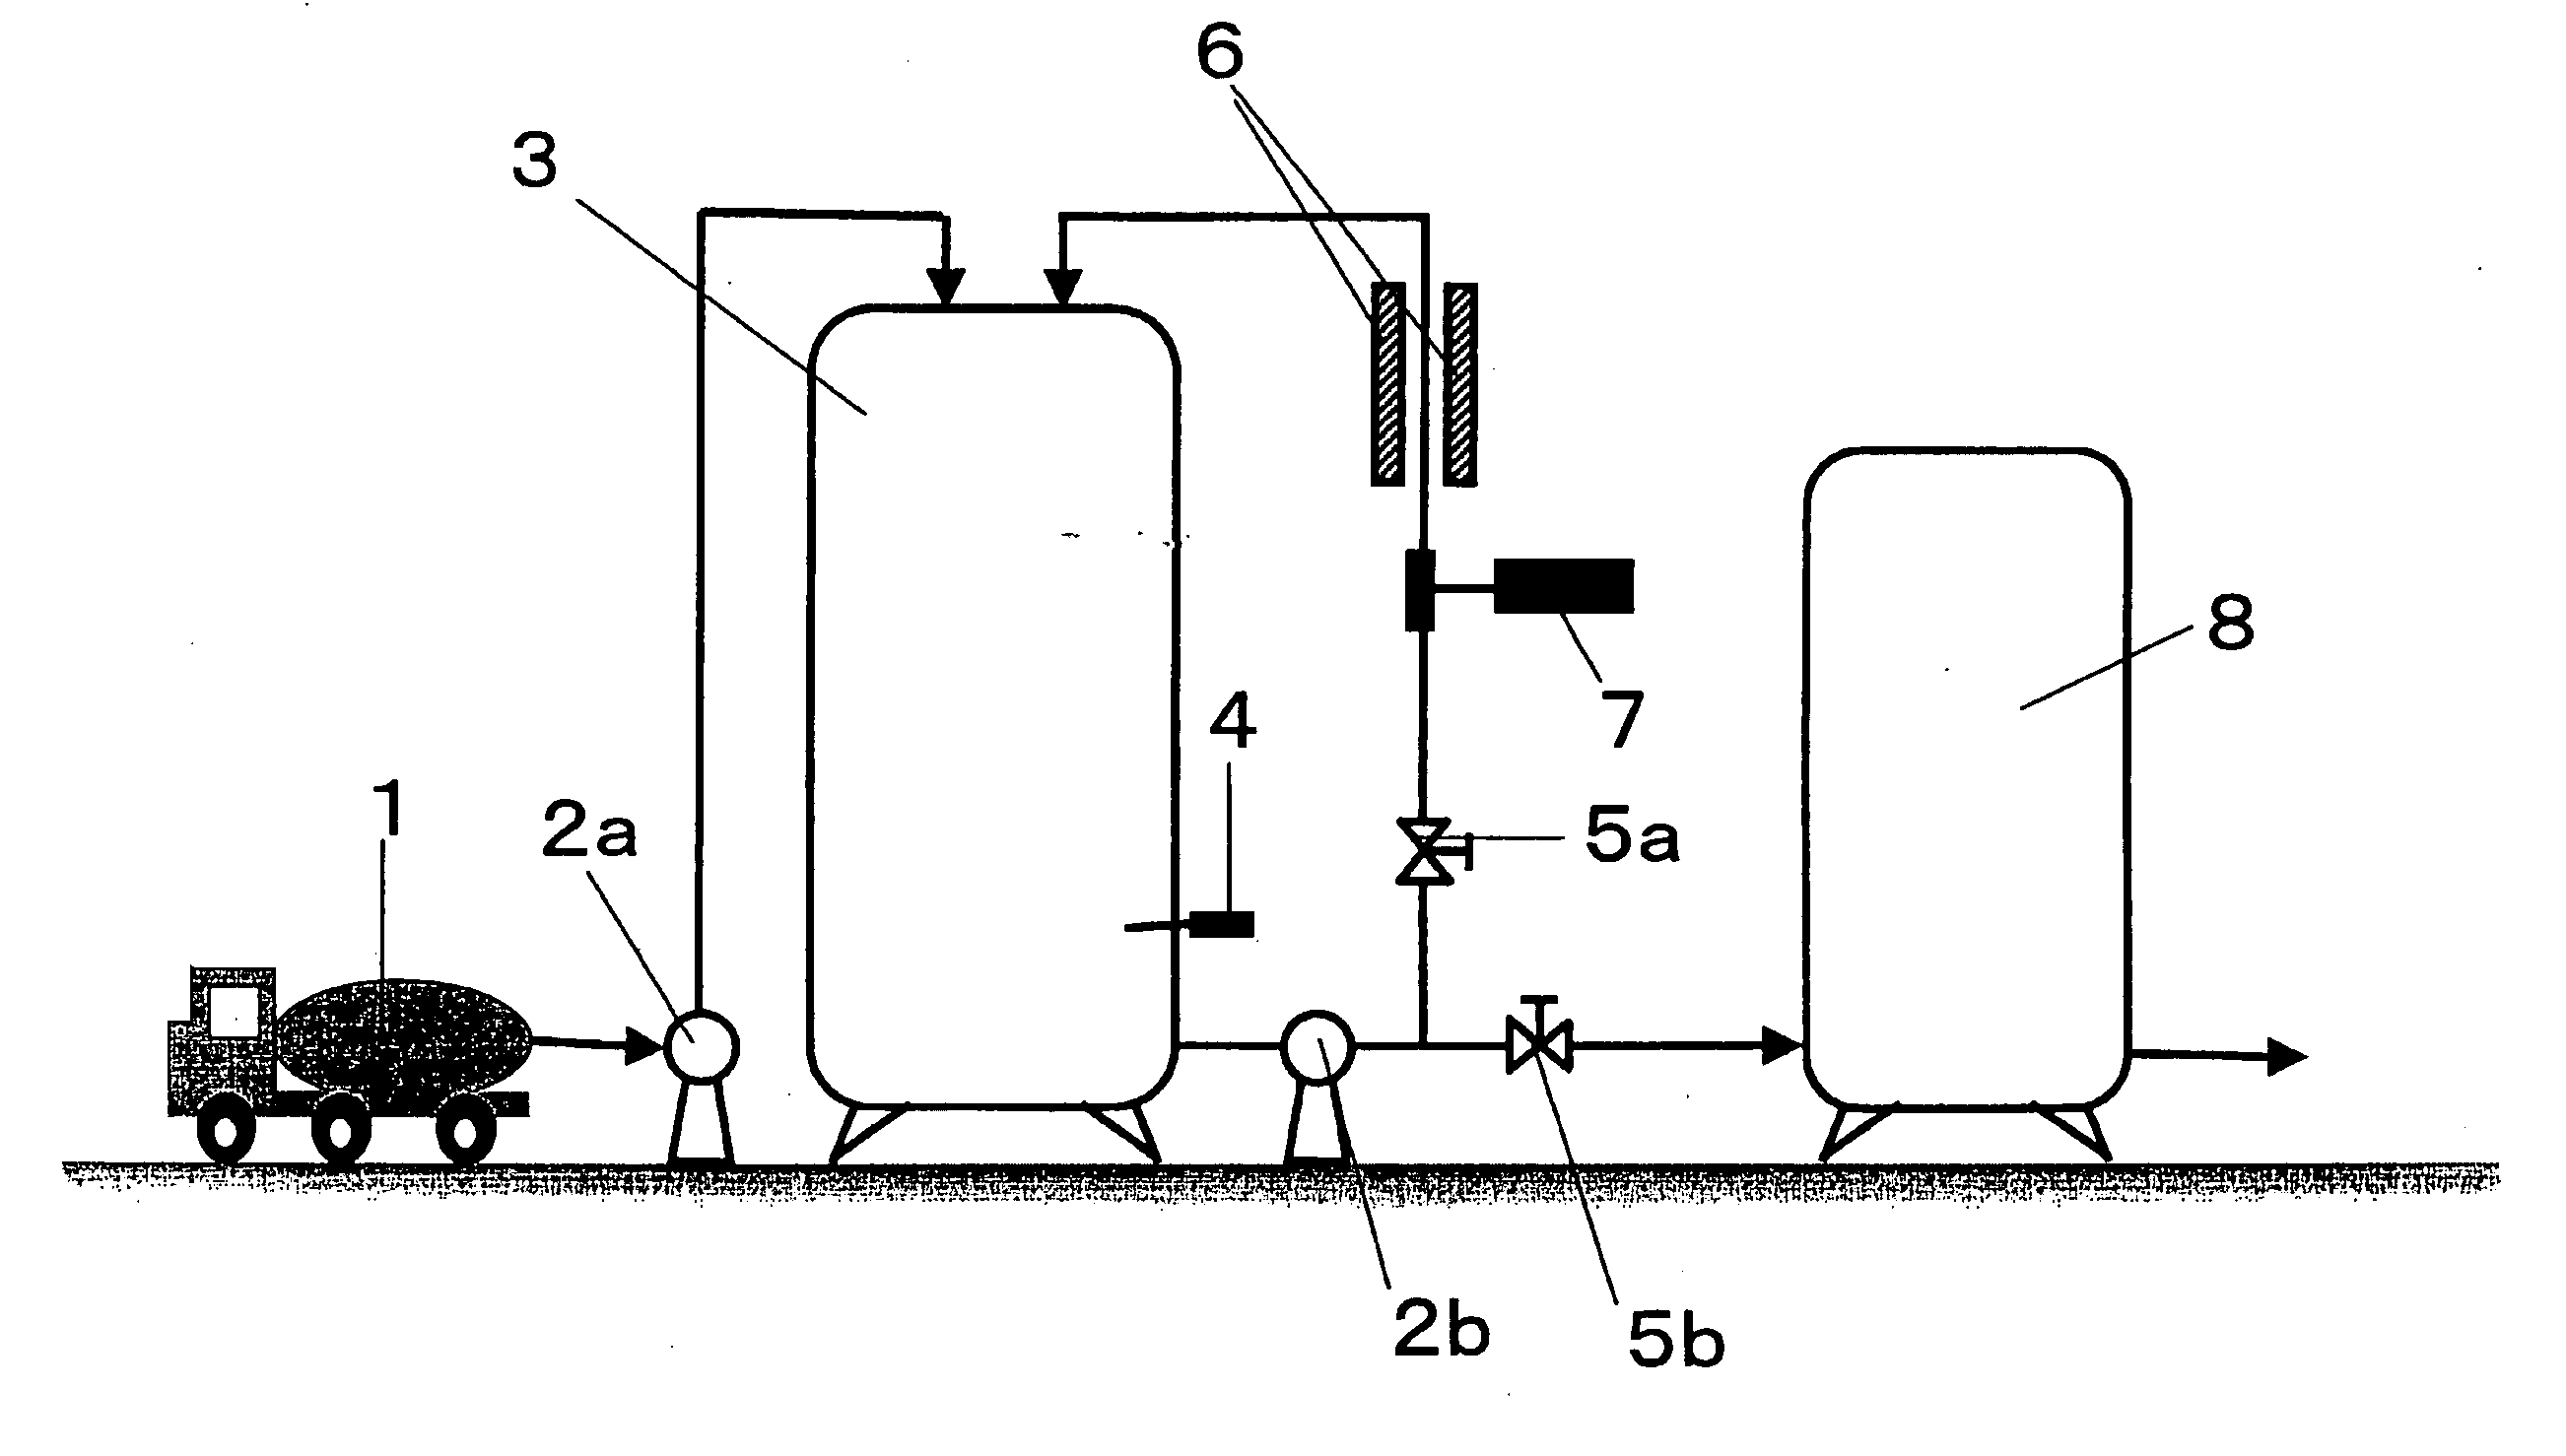 Apparatus for recycling waste sulfuric acid